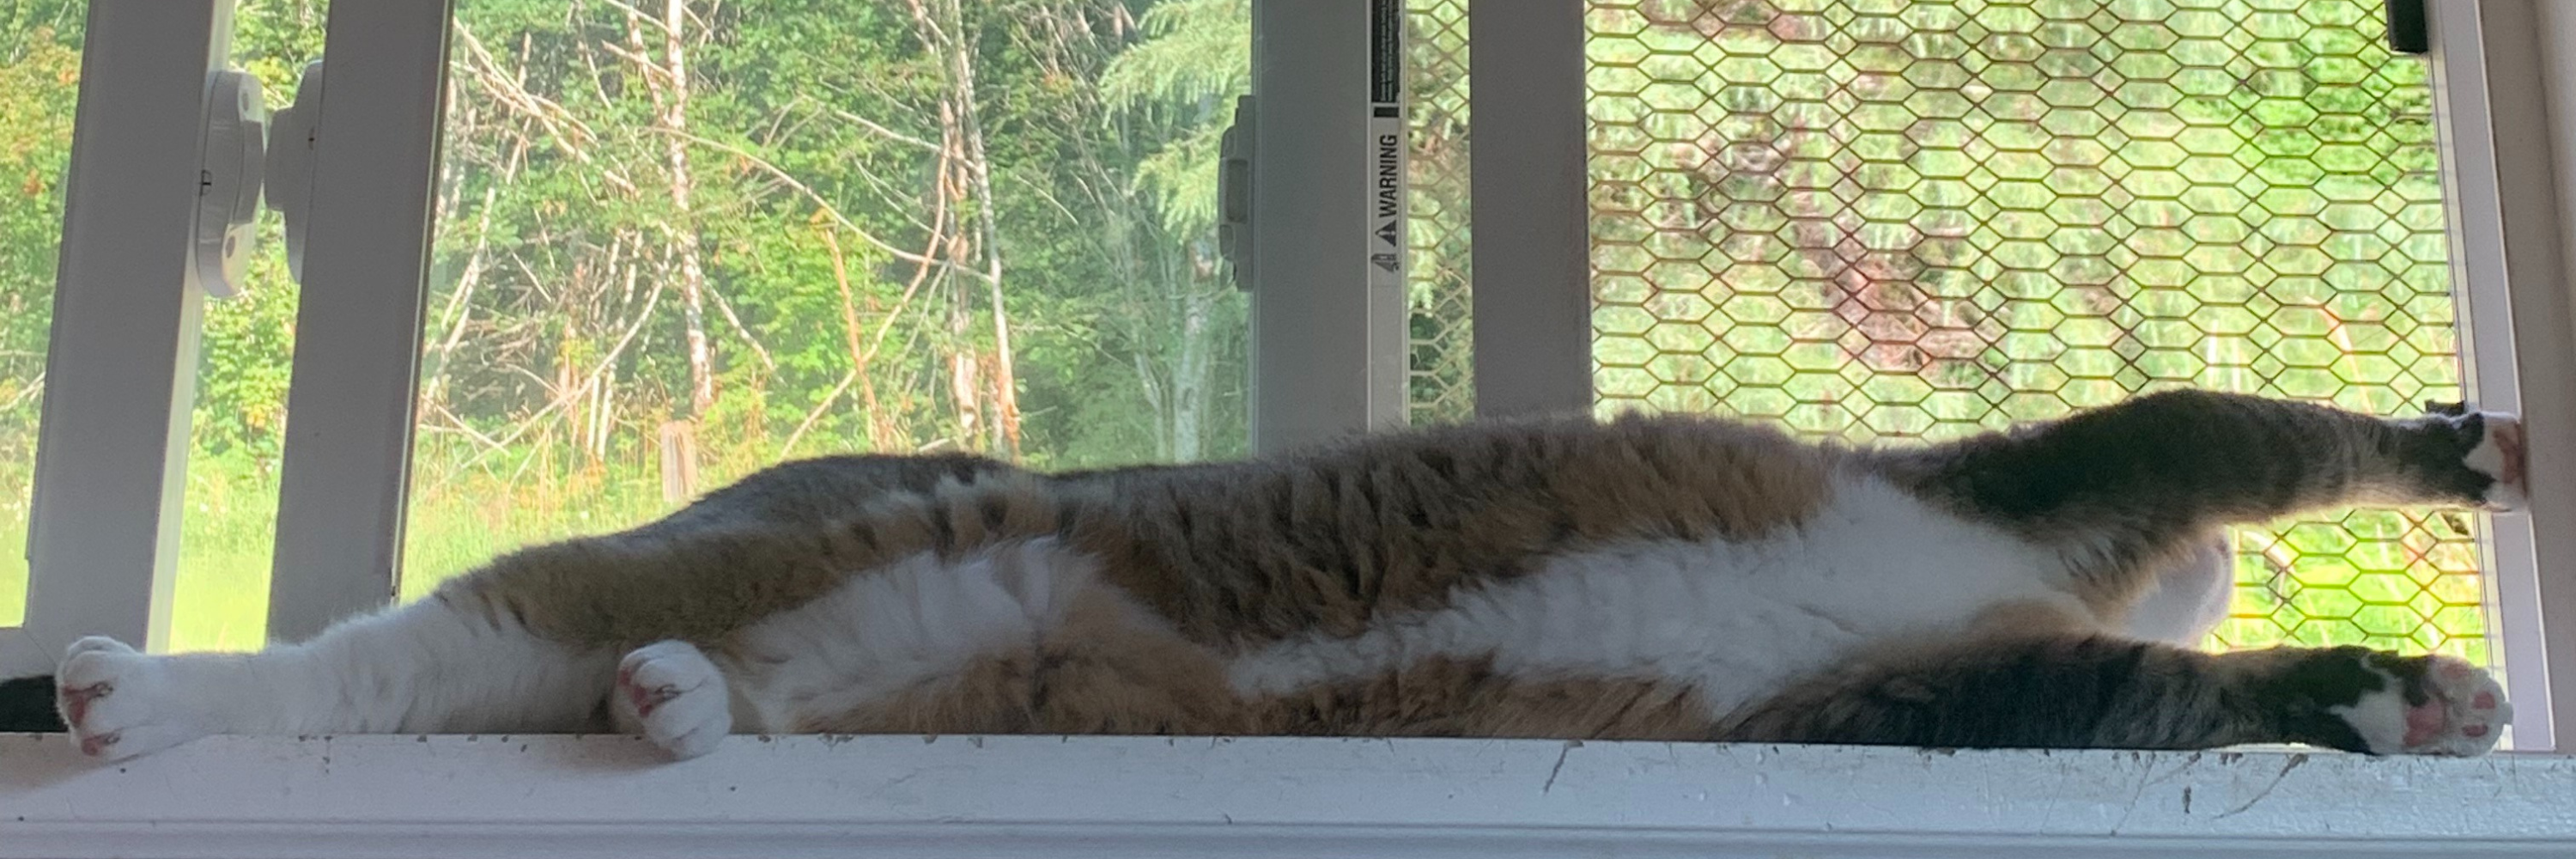 A cat stretching out on a windowsill